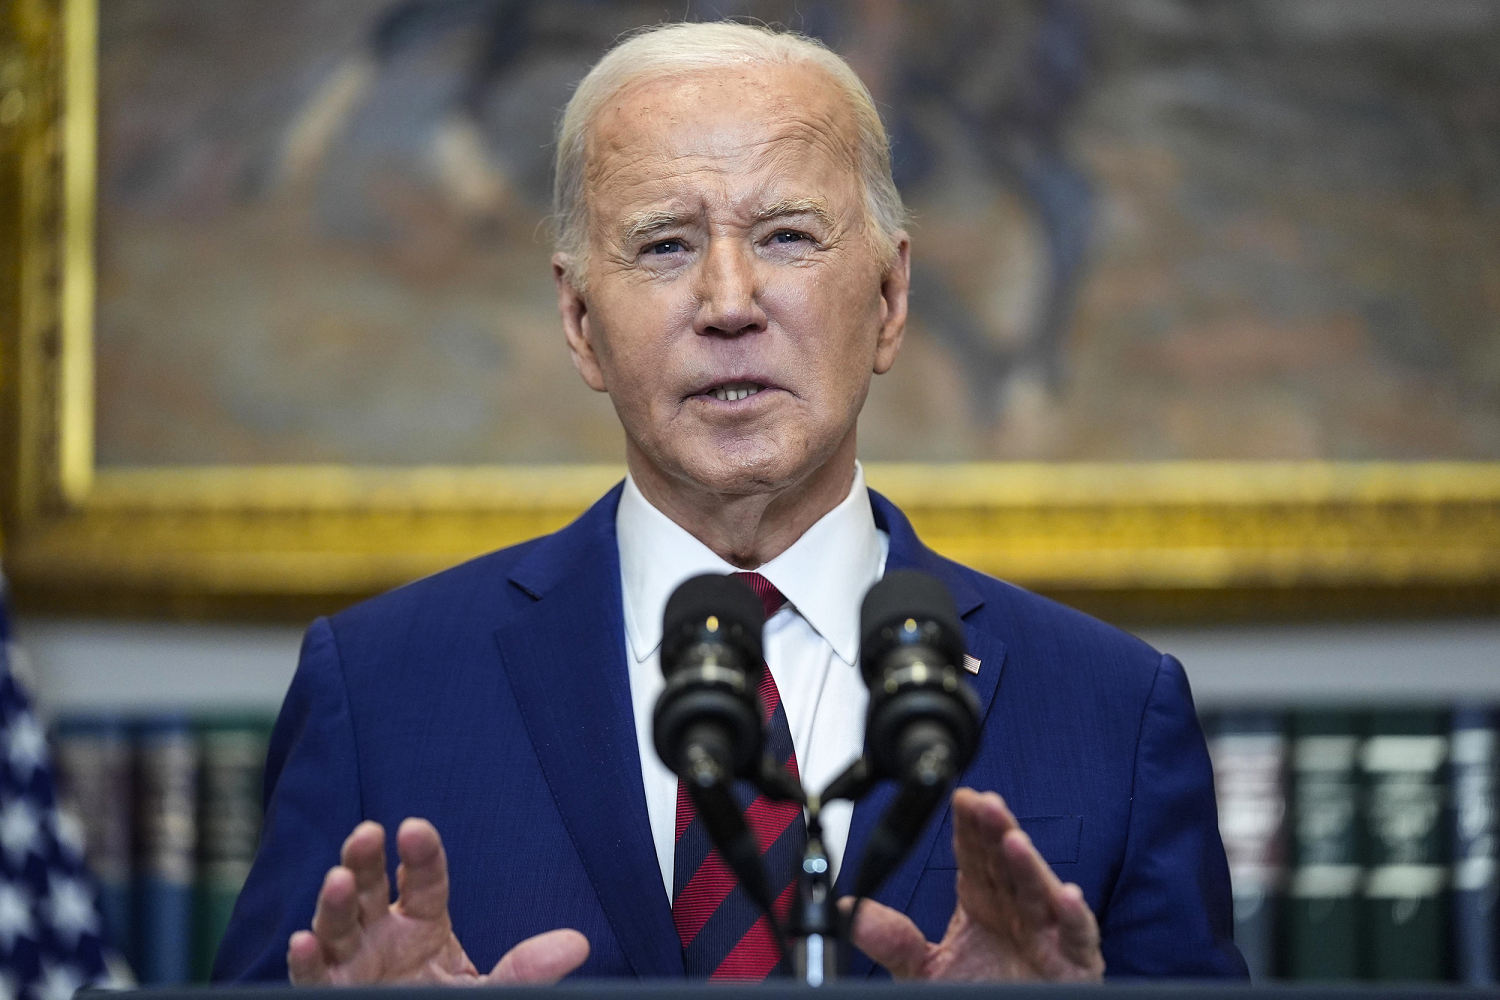 Biden says Baltimore bridge rebuild should be paid for by the federal government after collapse